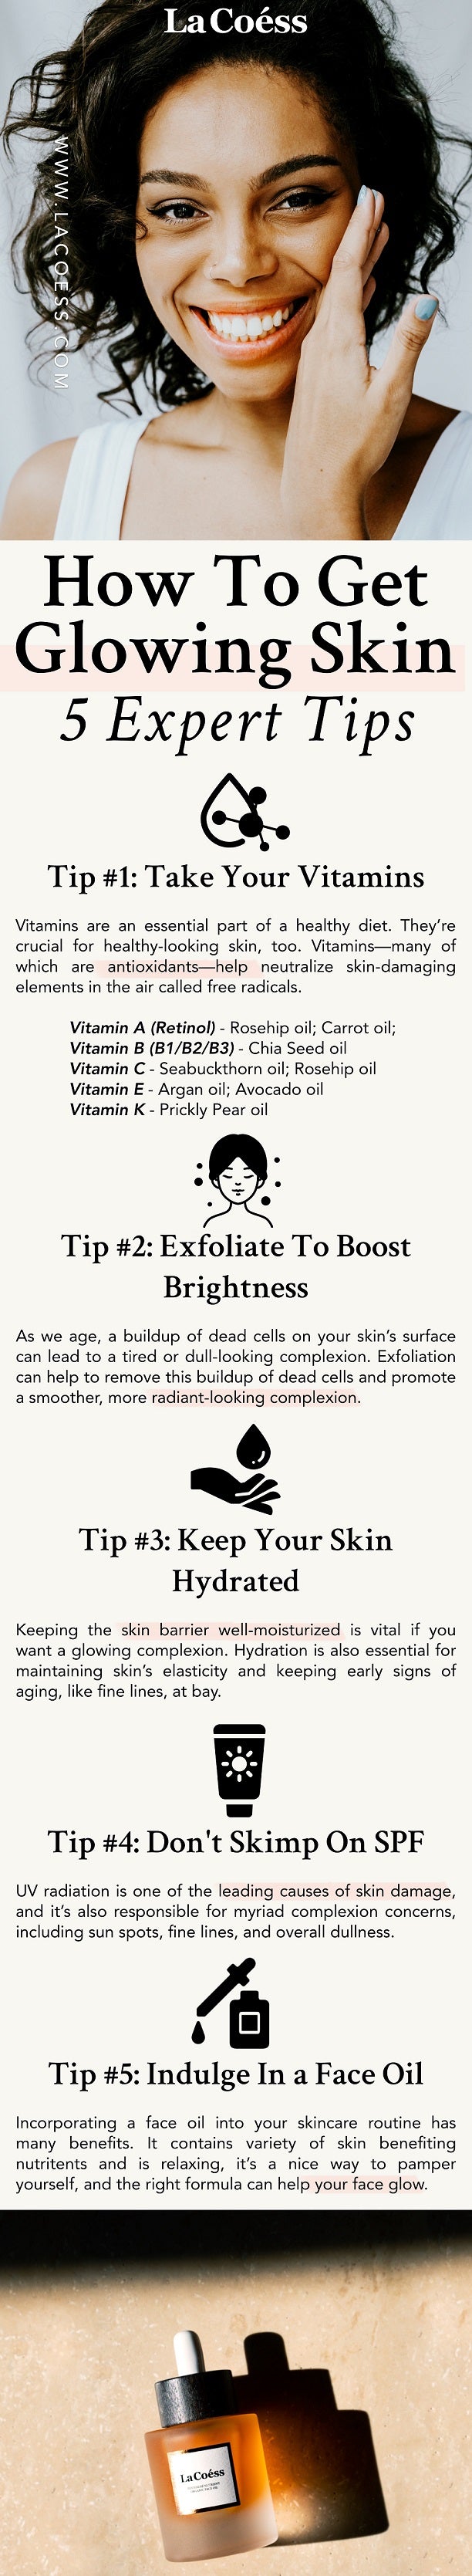 How To Get Glowing Skin - 5 Expert Tips